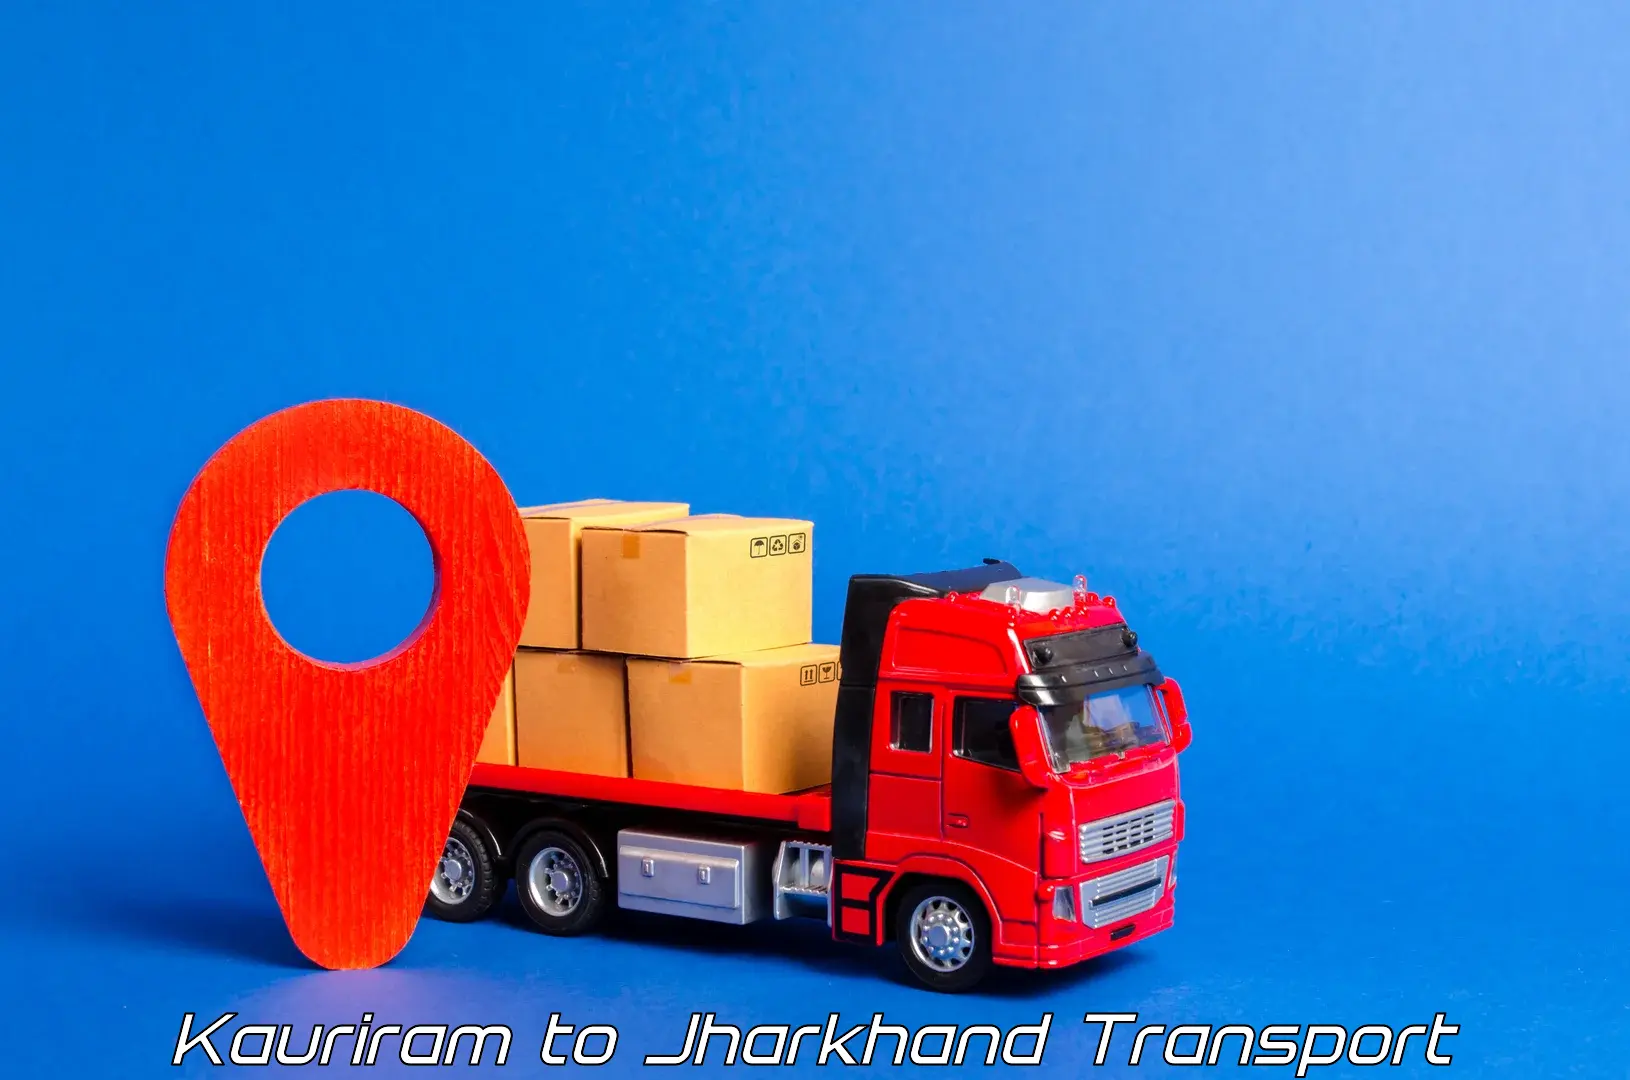 Truck transport companies in India in Kauriram to Jamshedpur